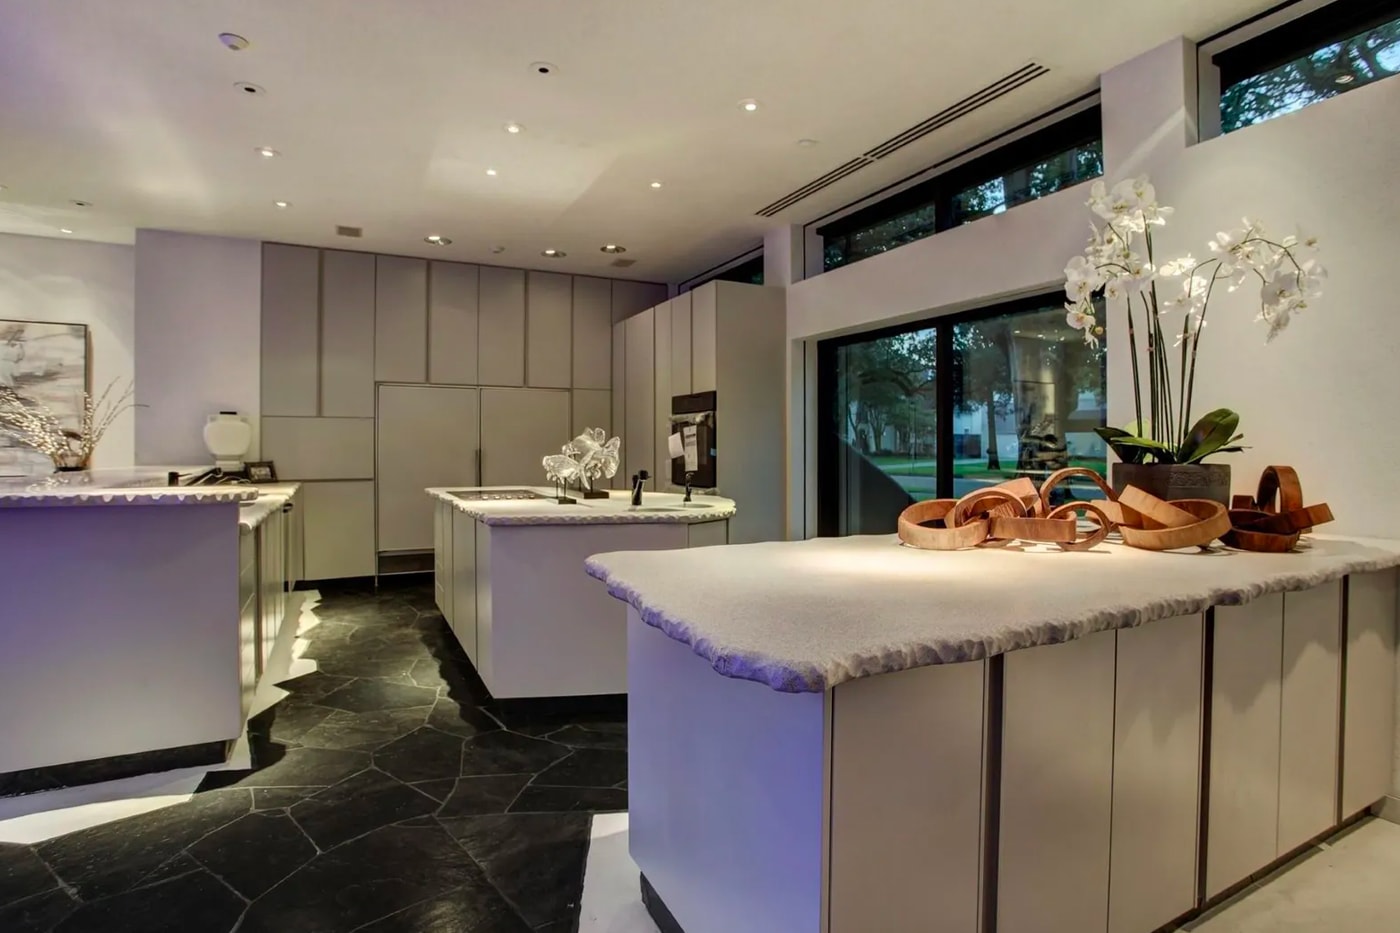 Houston Texas contemporary The Darth Vader House sothebys realty listing contemporary Architecture Homes 